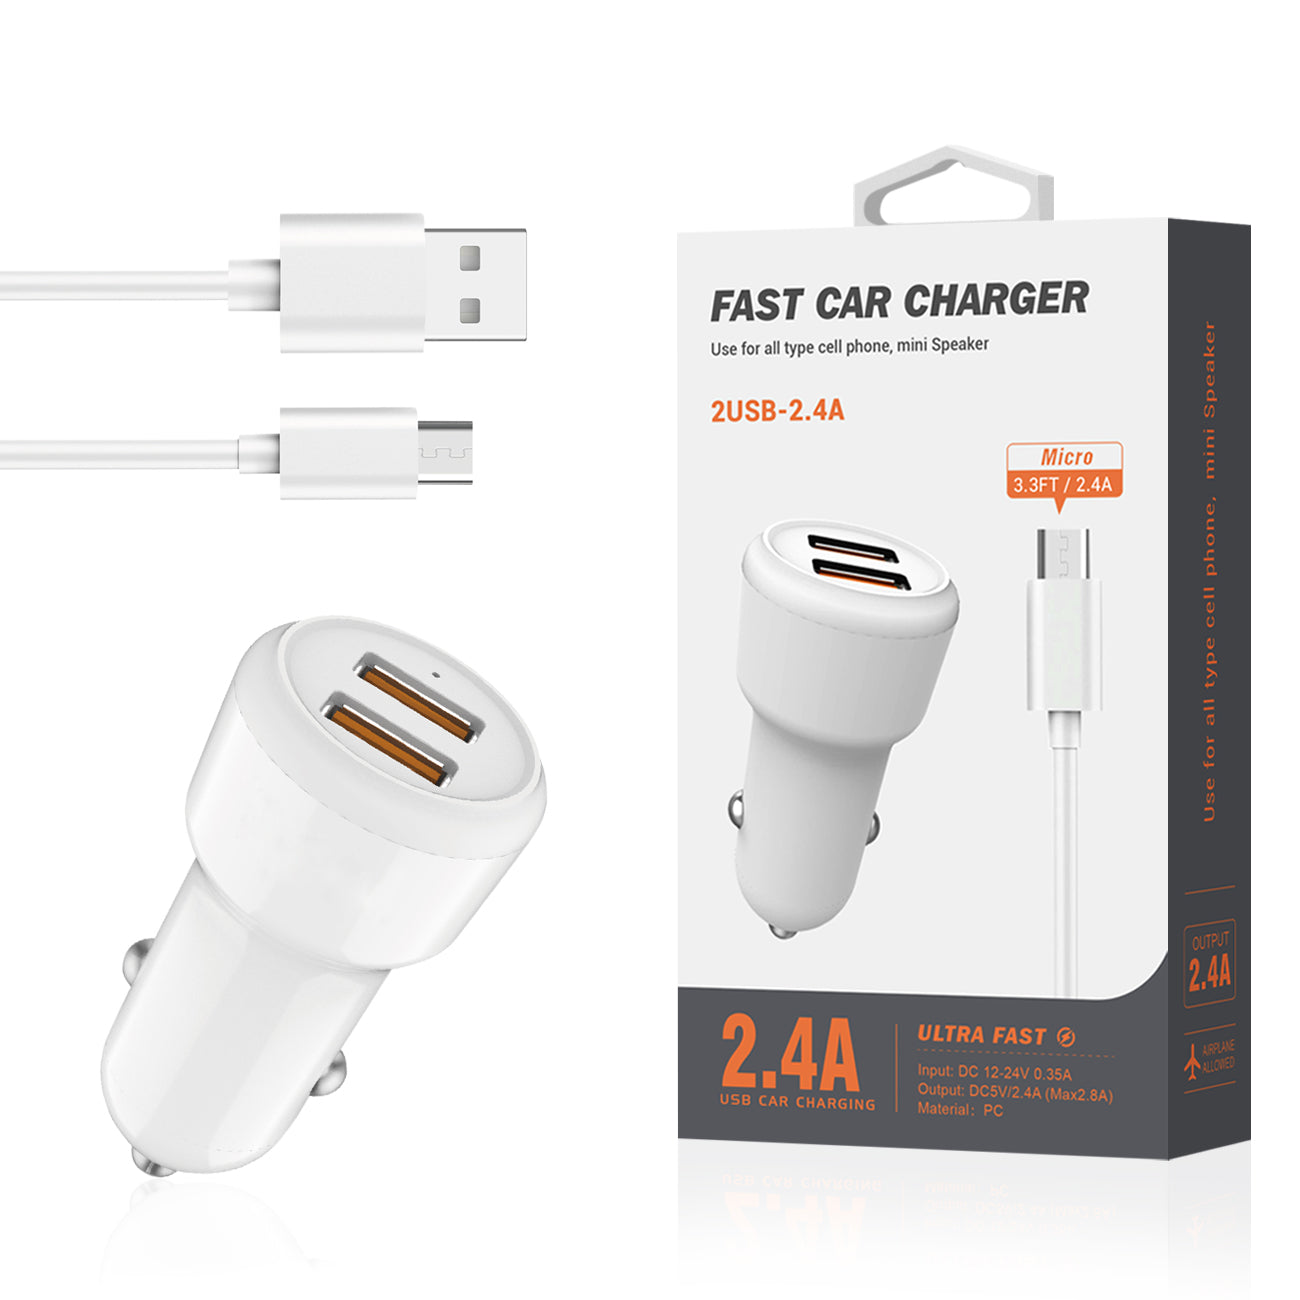 Car Charger Micro With Built In 3Ft Cable Reiko Portable White Color